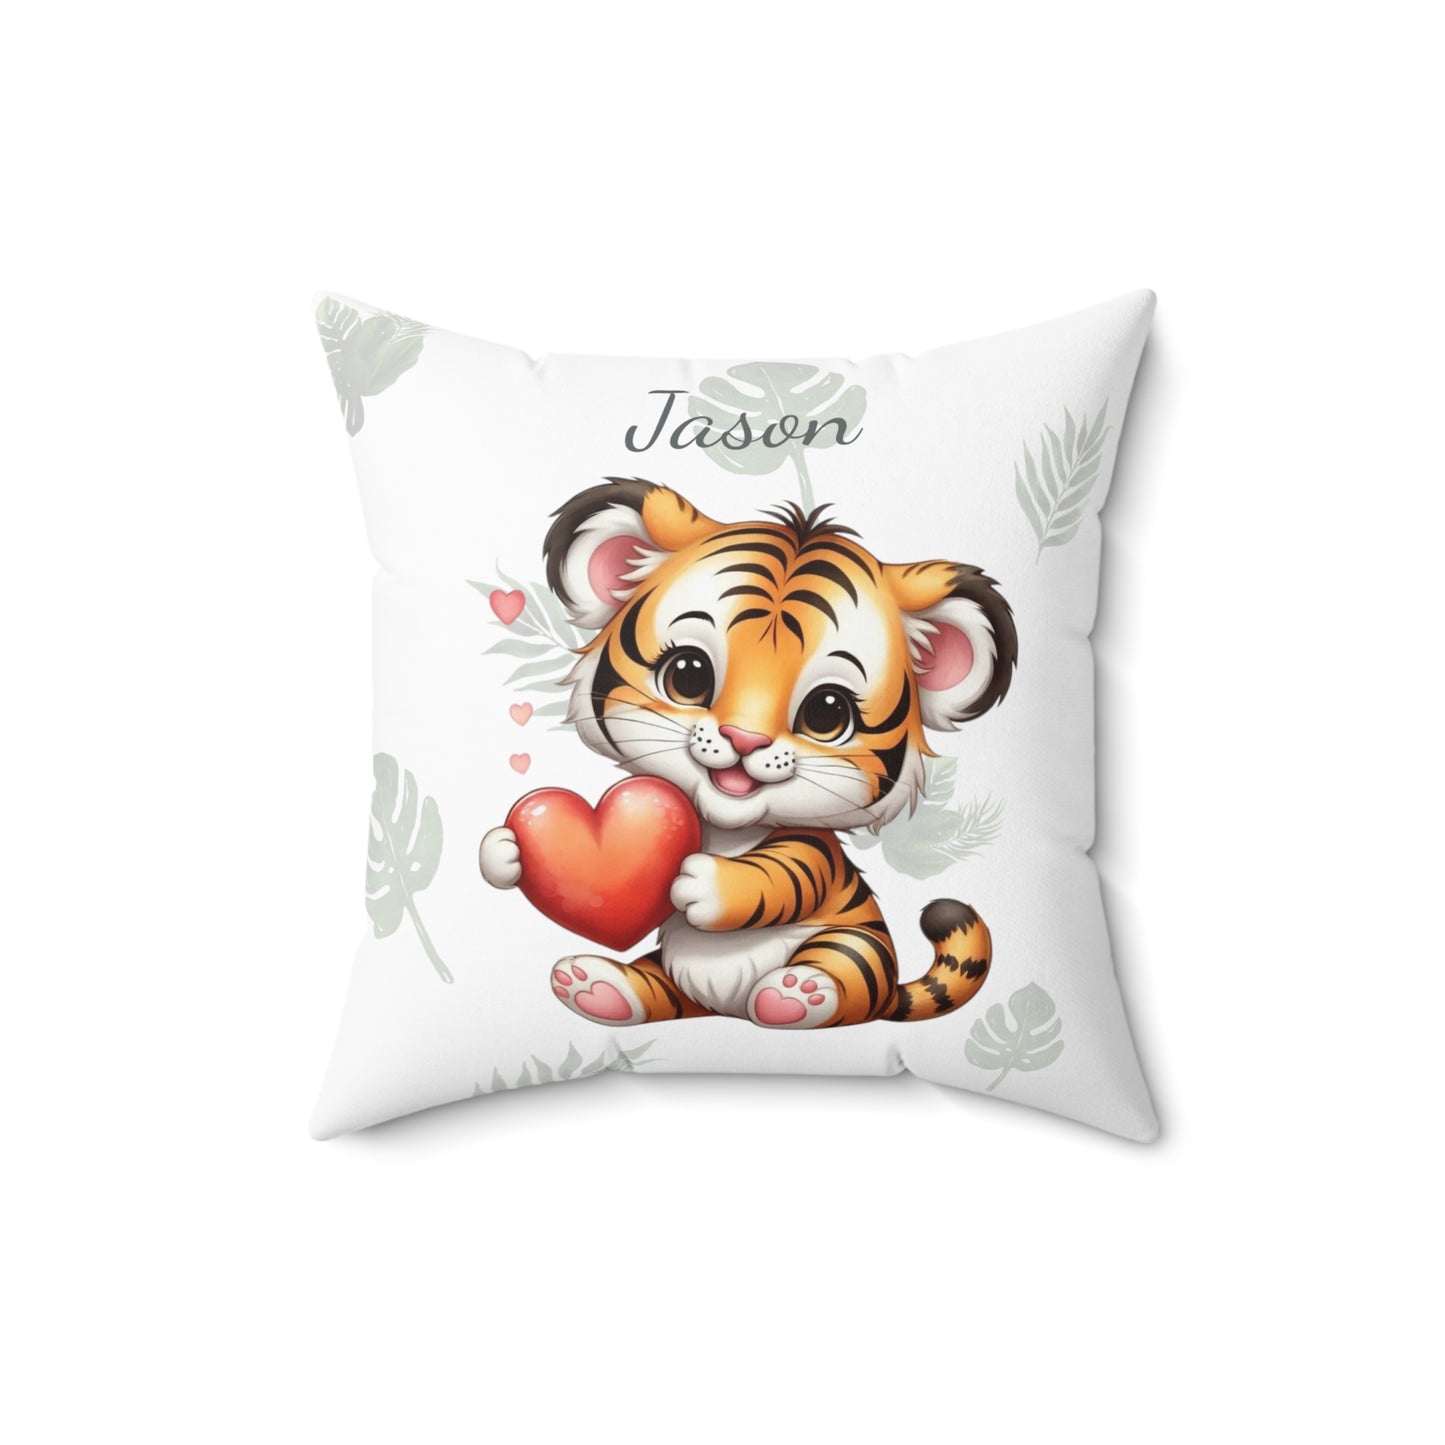 Toby the Tiger - Personalized Nursery Pillow